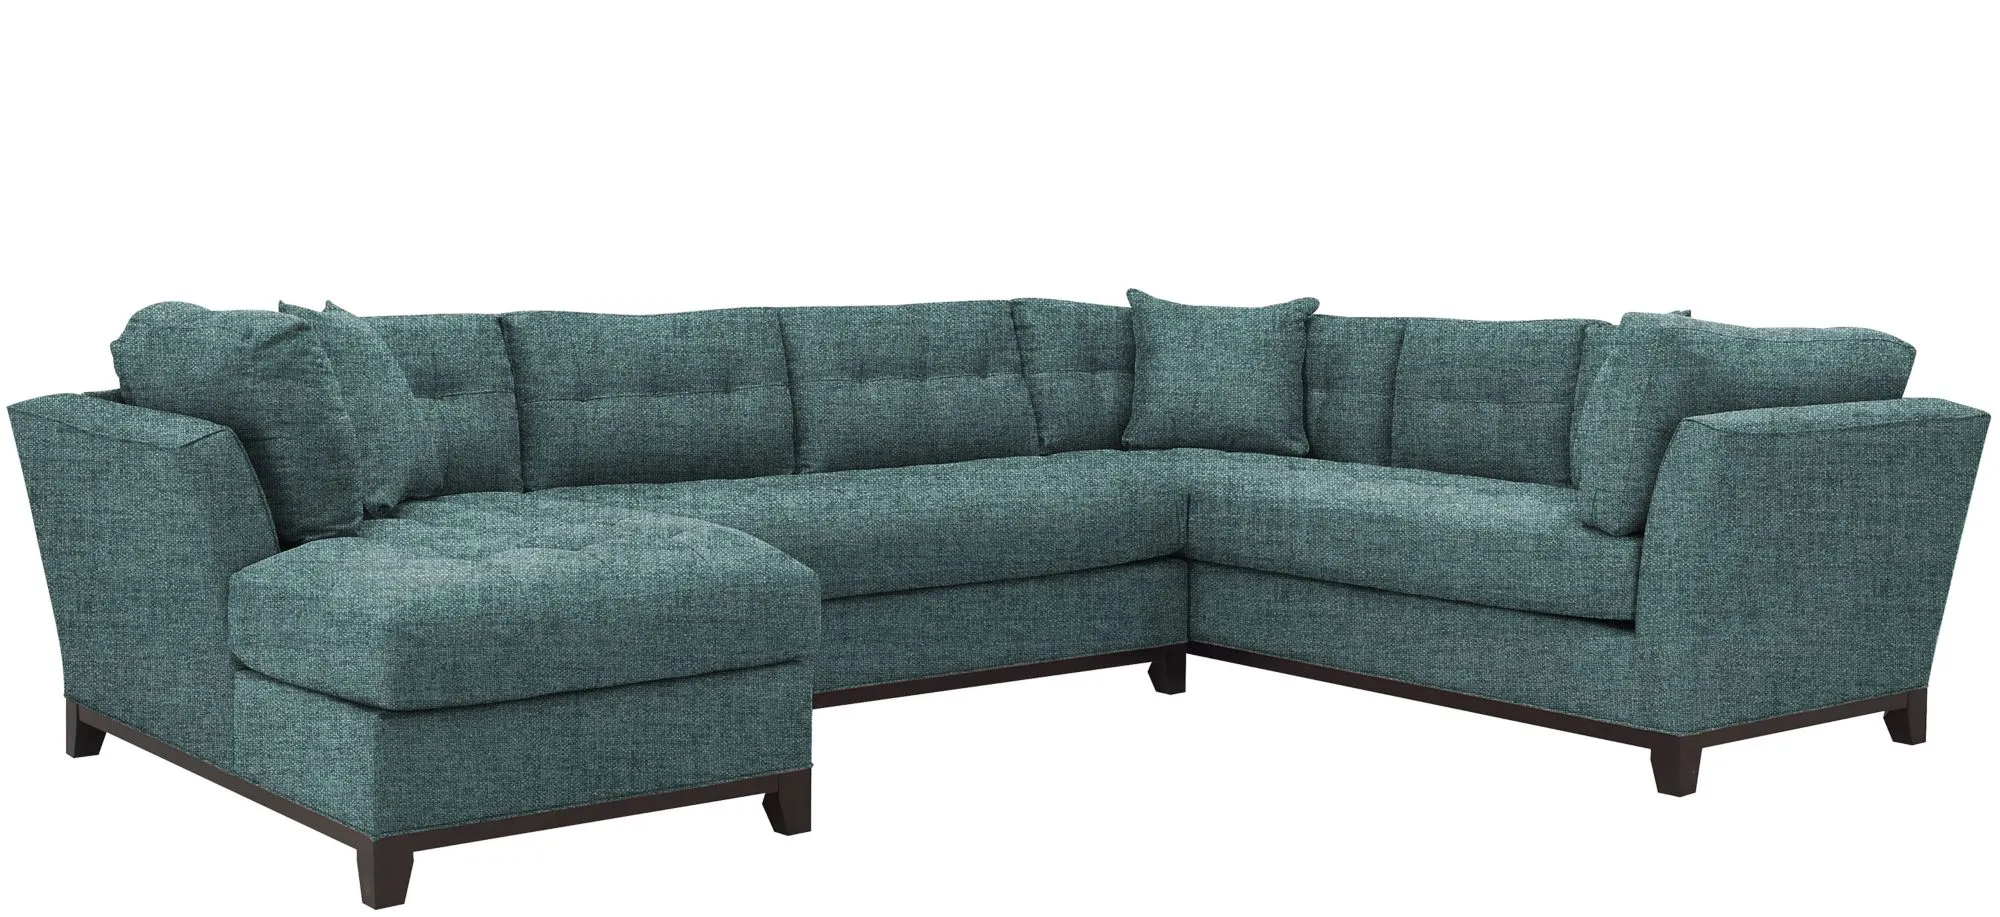 Cityscape 3-pc. Sectional in Santa Rosa Turquoise by H.M. Richards